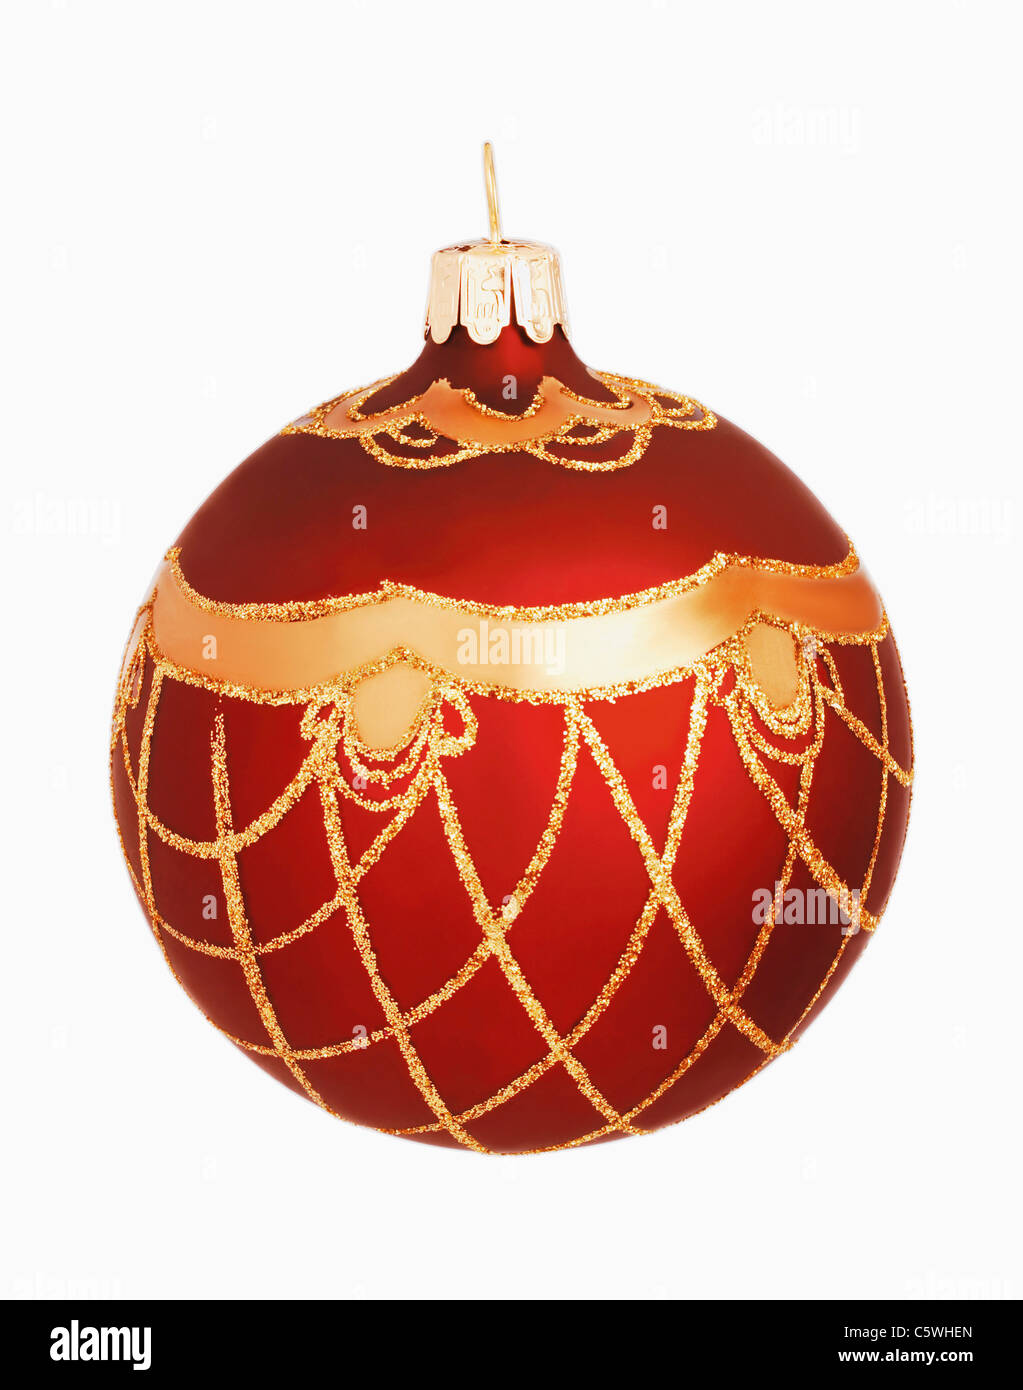 Christmas bauble against white background, close up Stock Photo